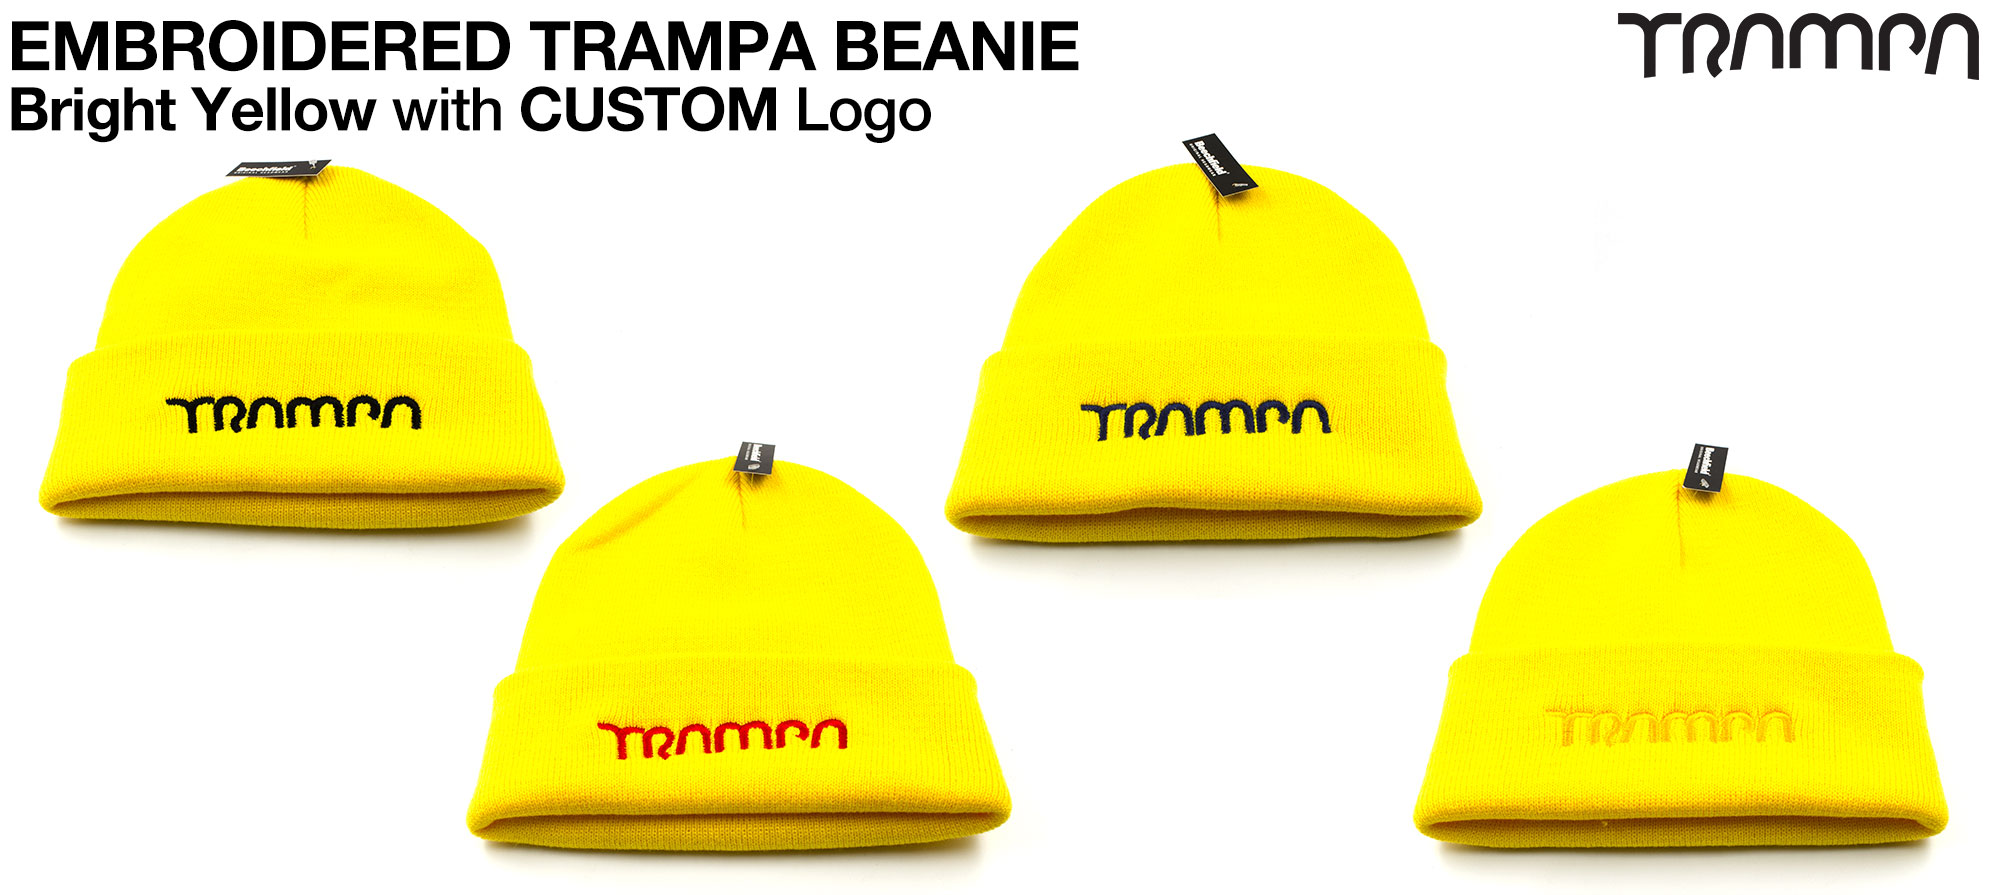 Bright YELLOW Beanie with EMBROIDERED TRAMPA logo - Double thick turn over for extra warmth